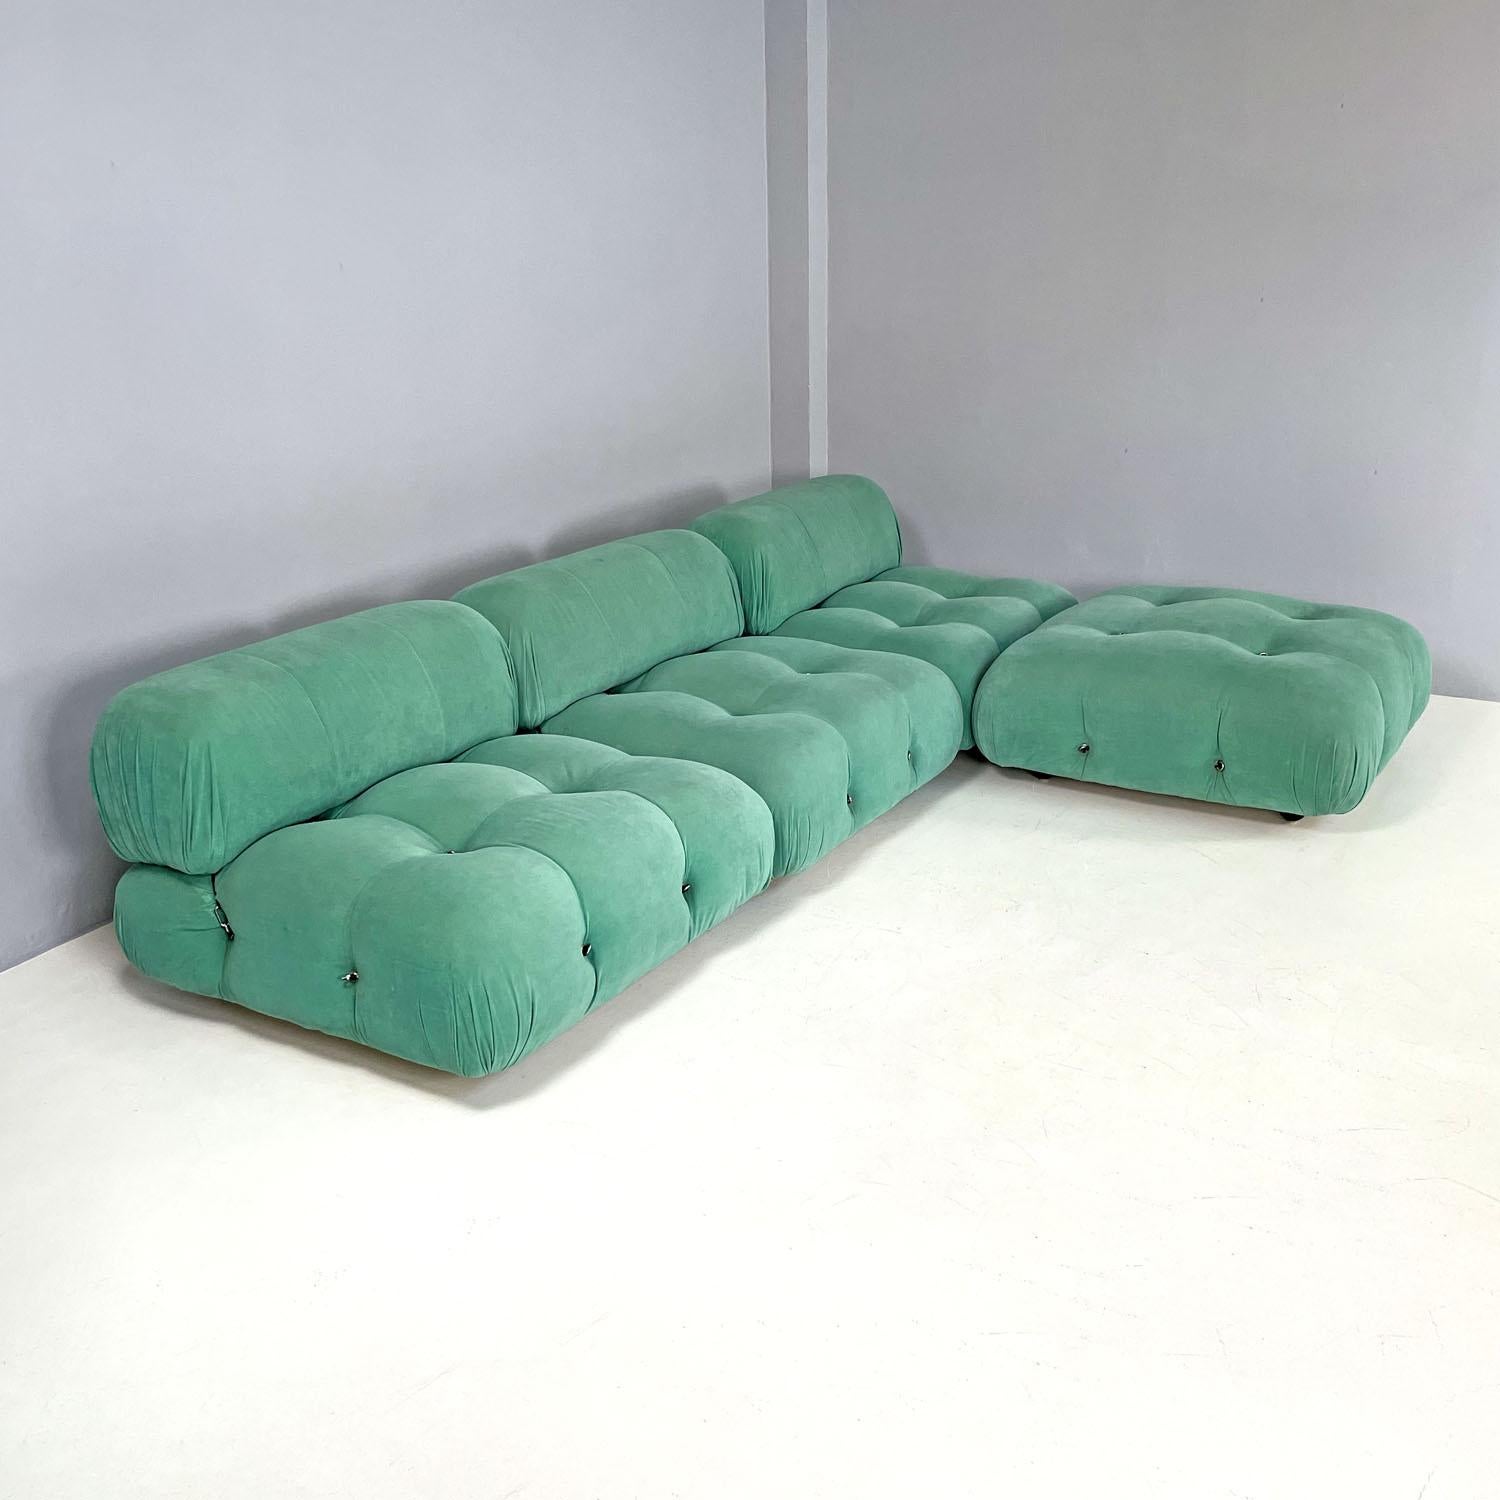 Italian modern light teal velvet sofa Camaleonda Mario Bellini B&B Italia, 1970s
Modular sofa mod. Camaleonda entirely padded and covered in light teal velvet. The rounded backrests are fixed to the seats with black plastic laces which, using a